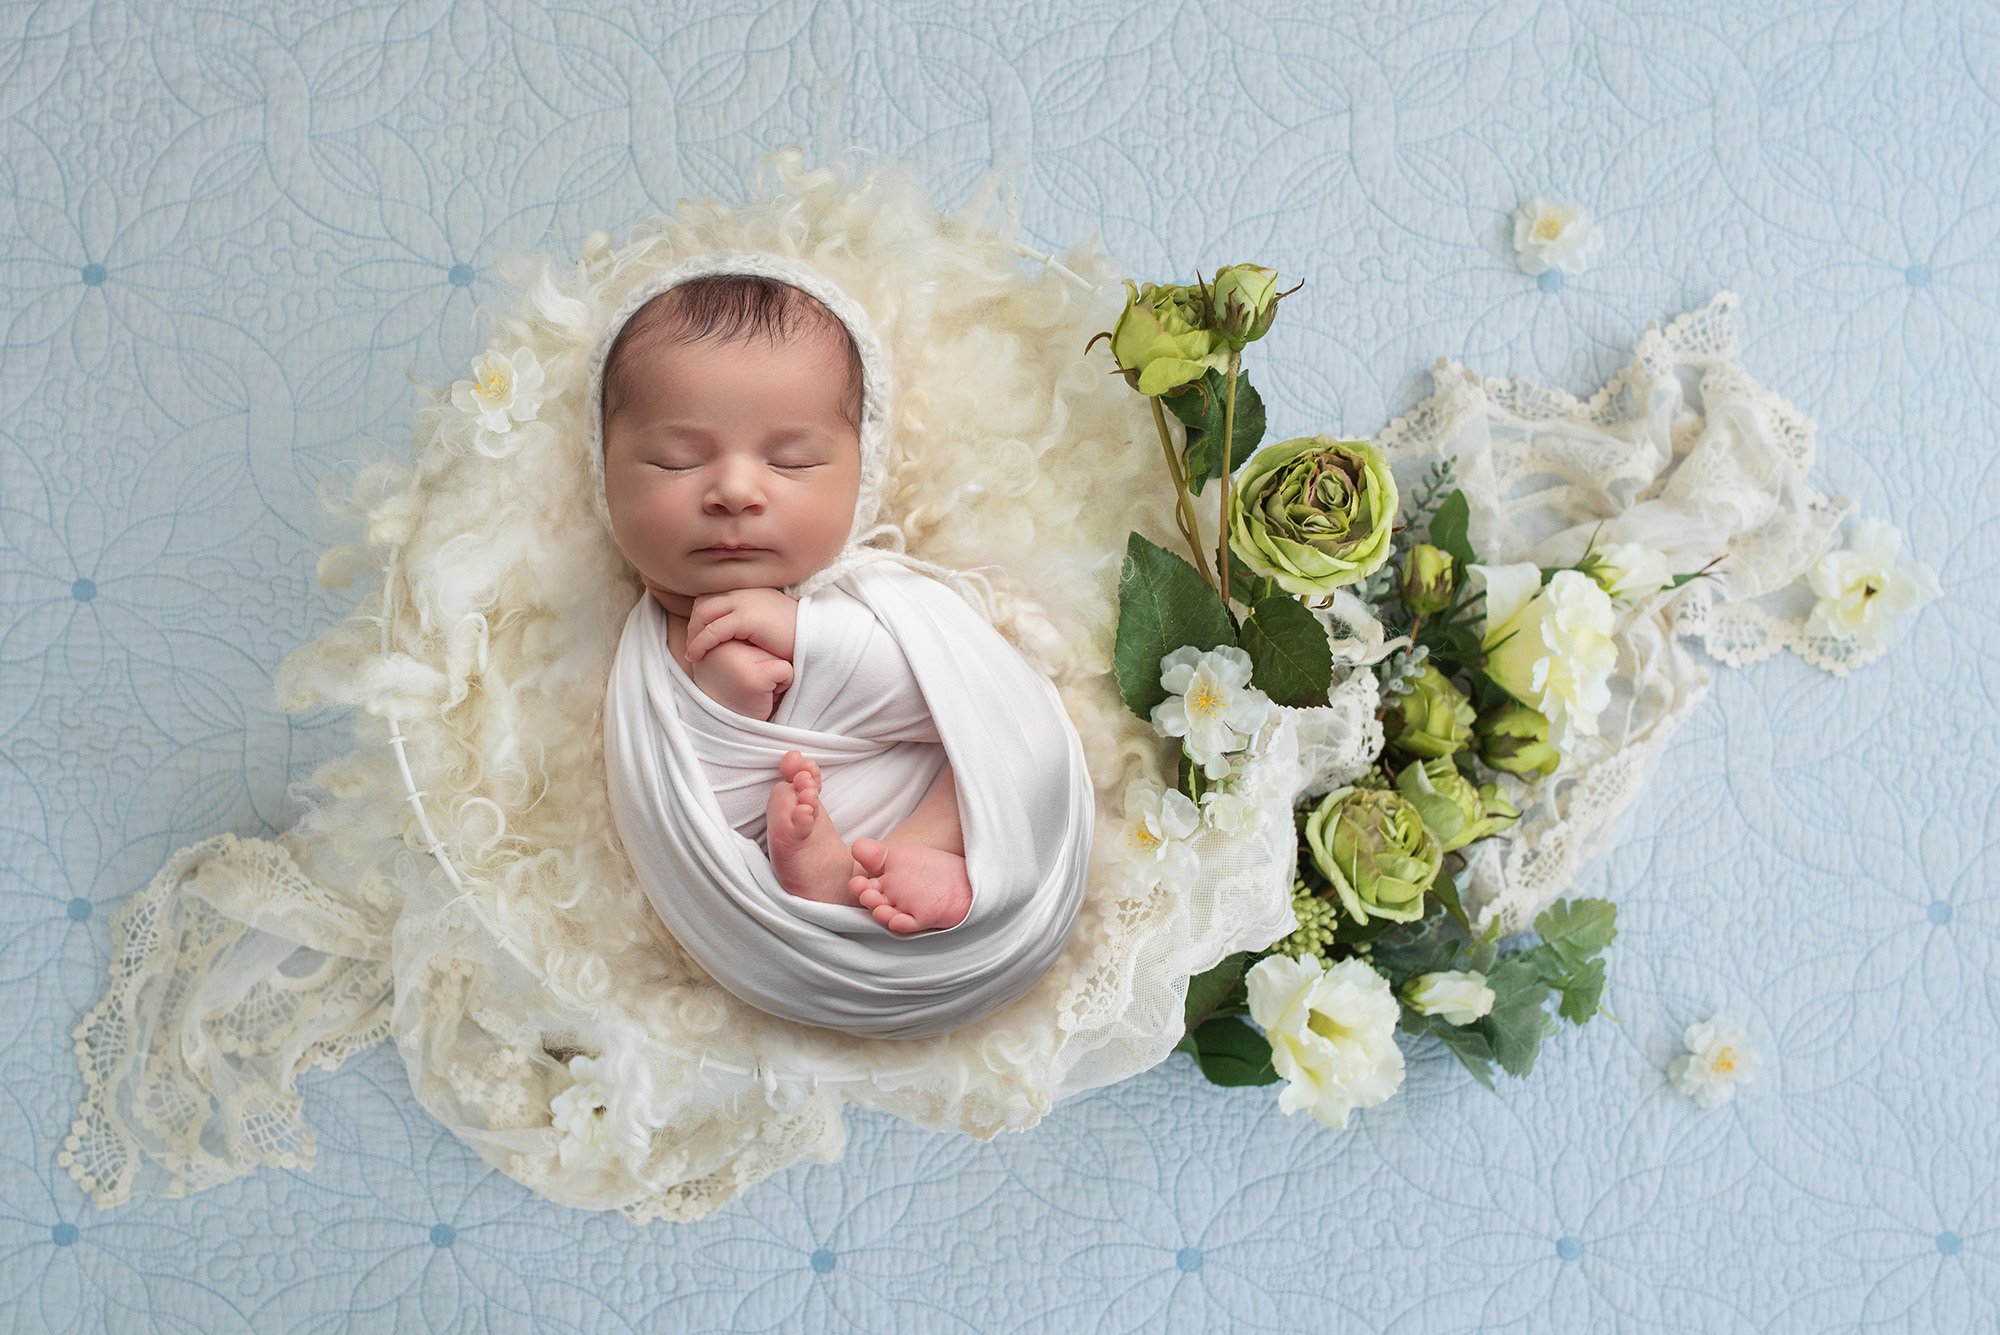 baby girl swaddled in white laying on top of antique lace blanket with white and green floral accents on floral background